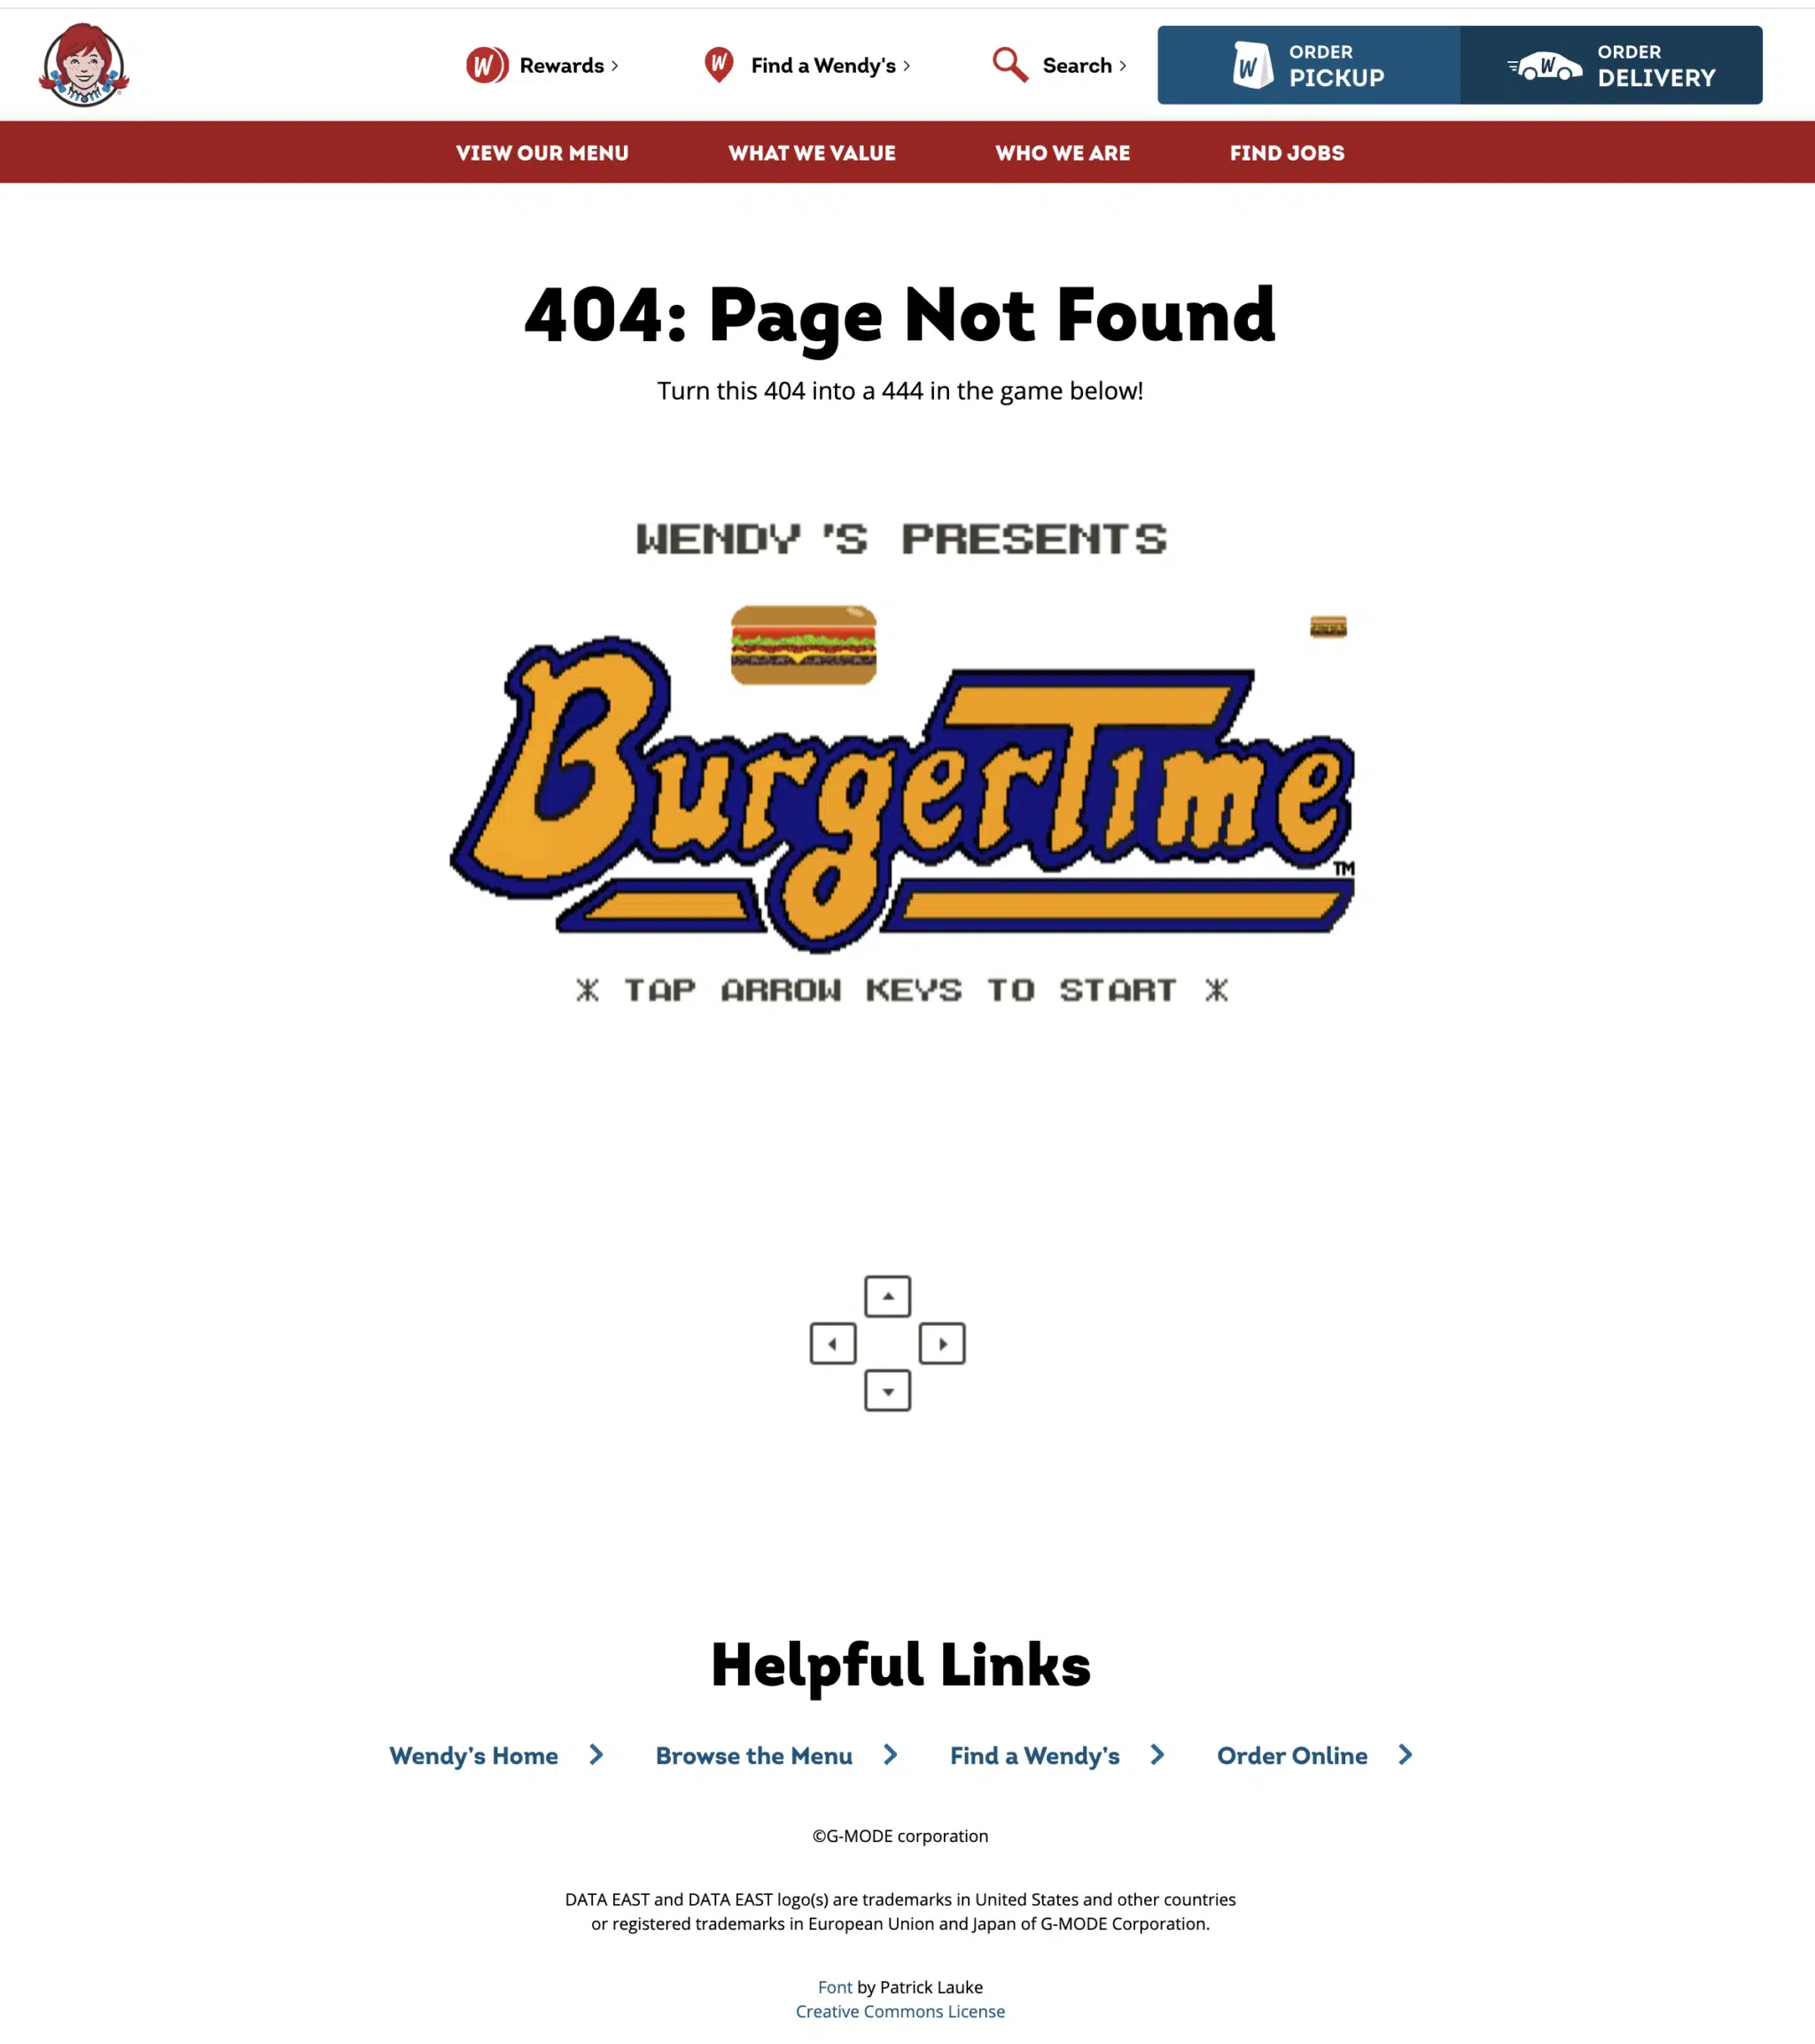 Wendys 404 page